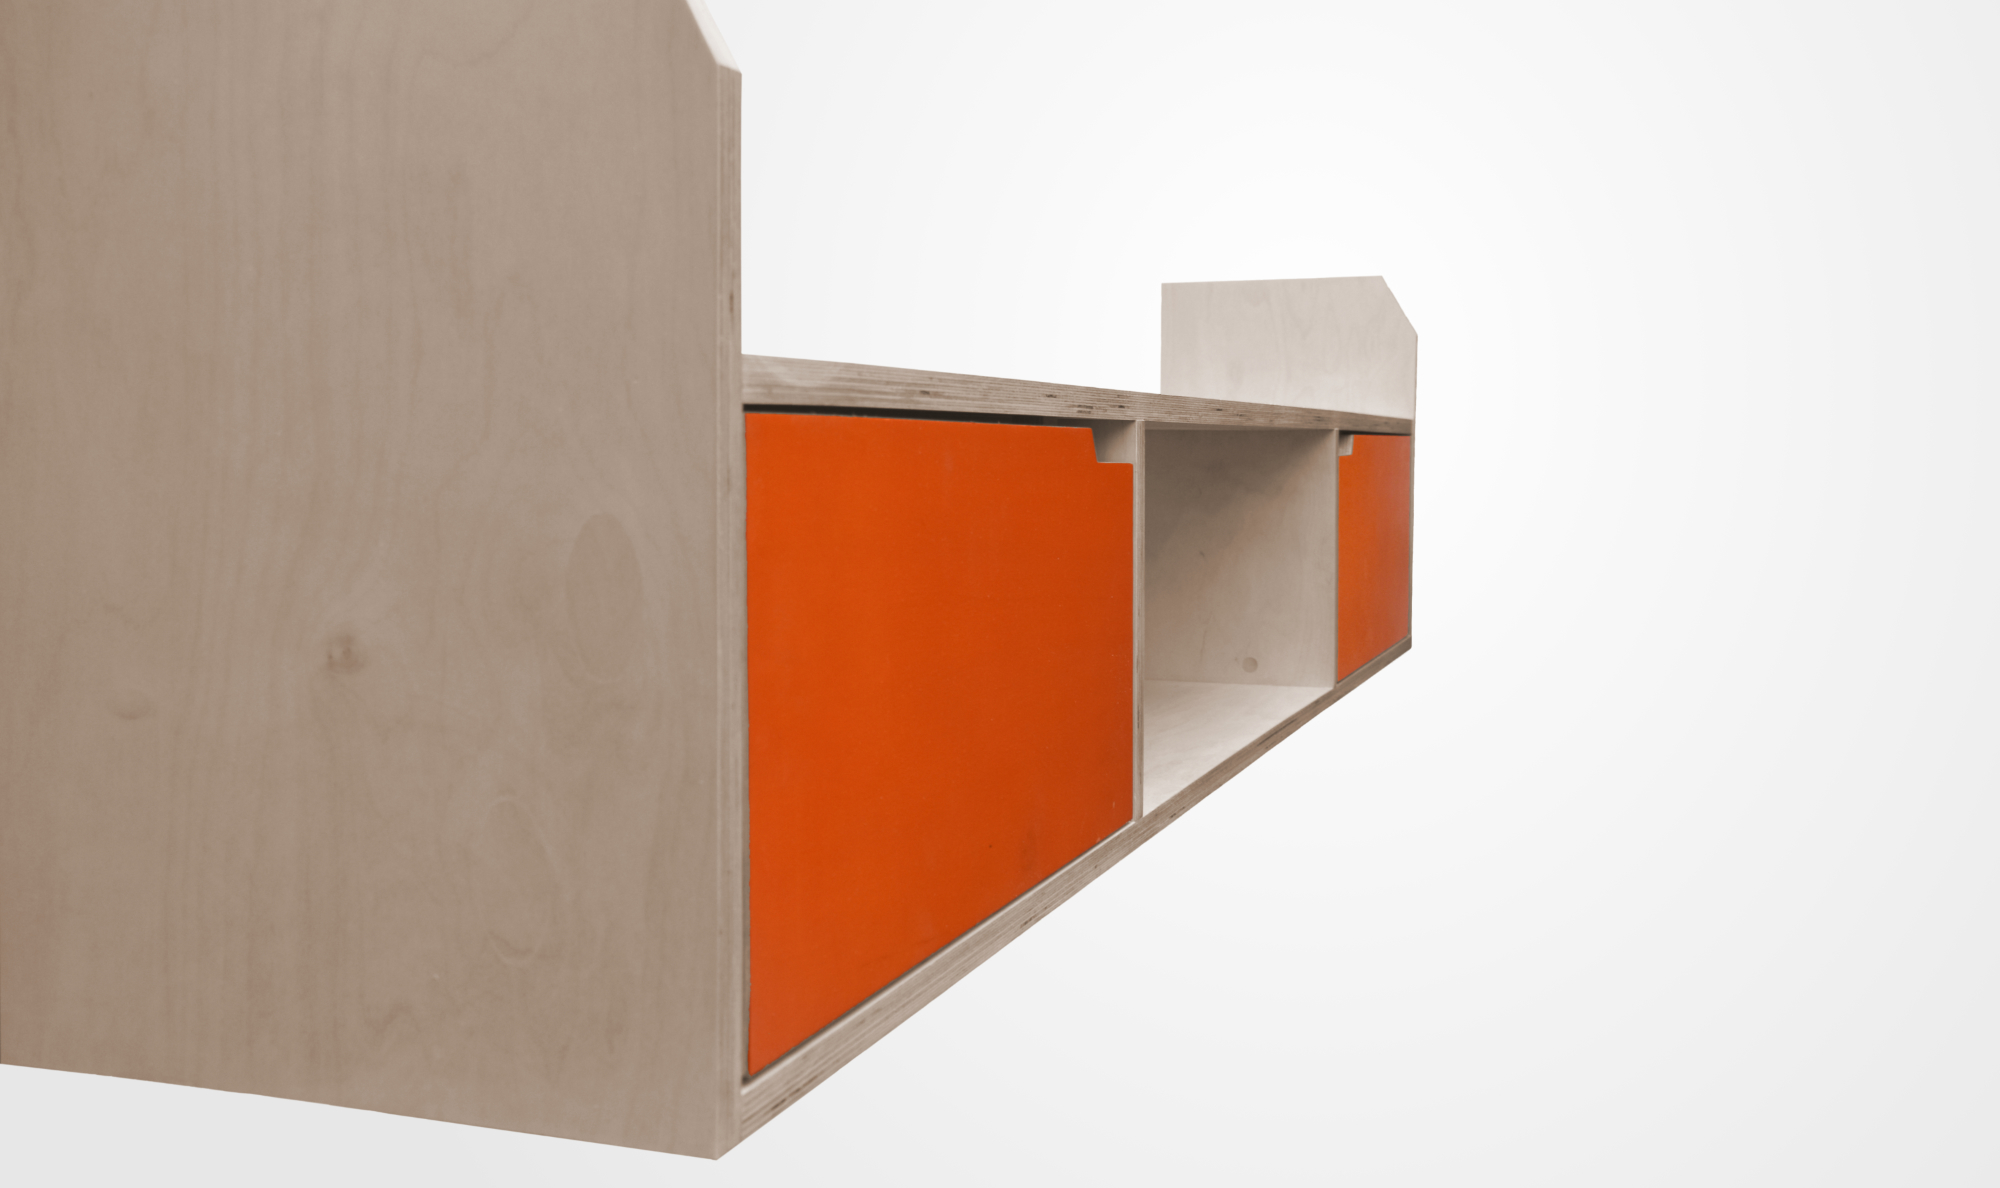 Mmh Furniture 'Horizontal' cabinet birch plywood left side view